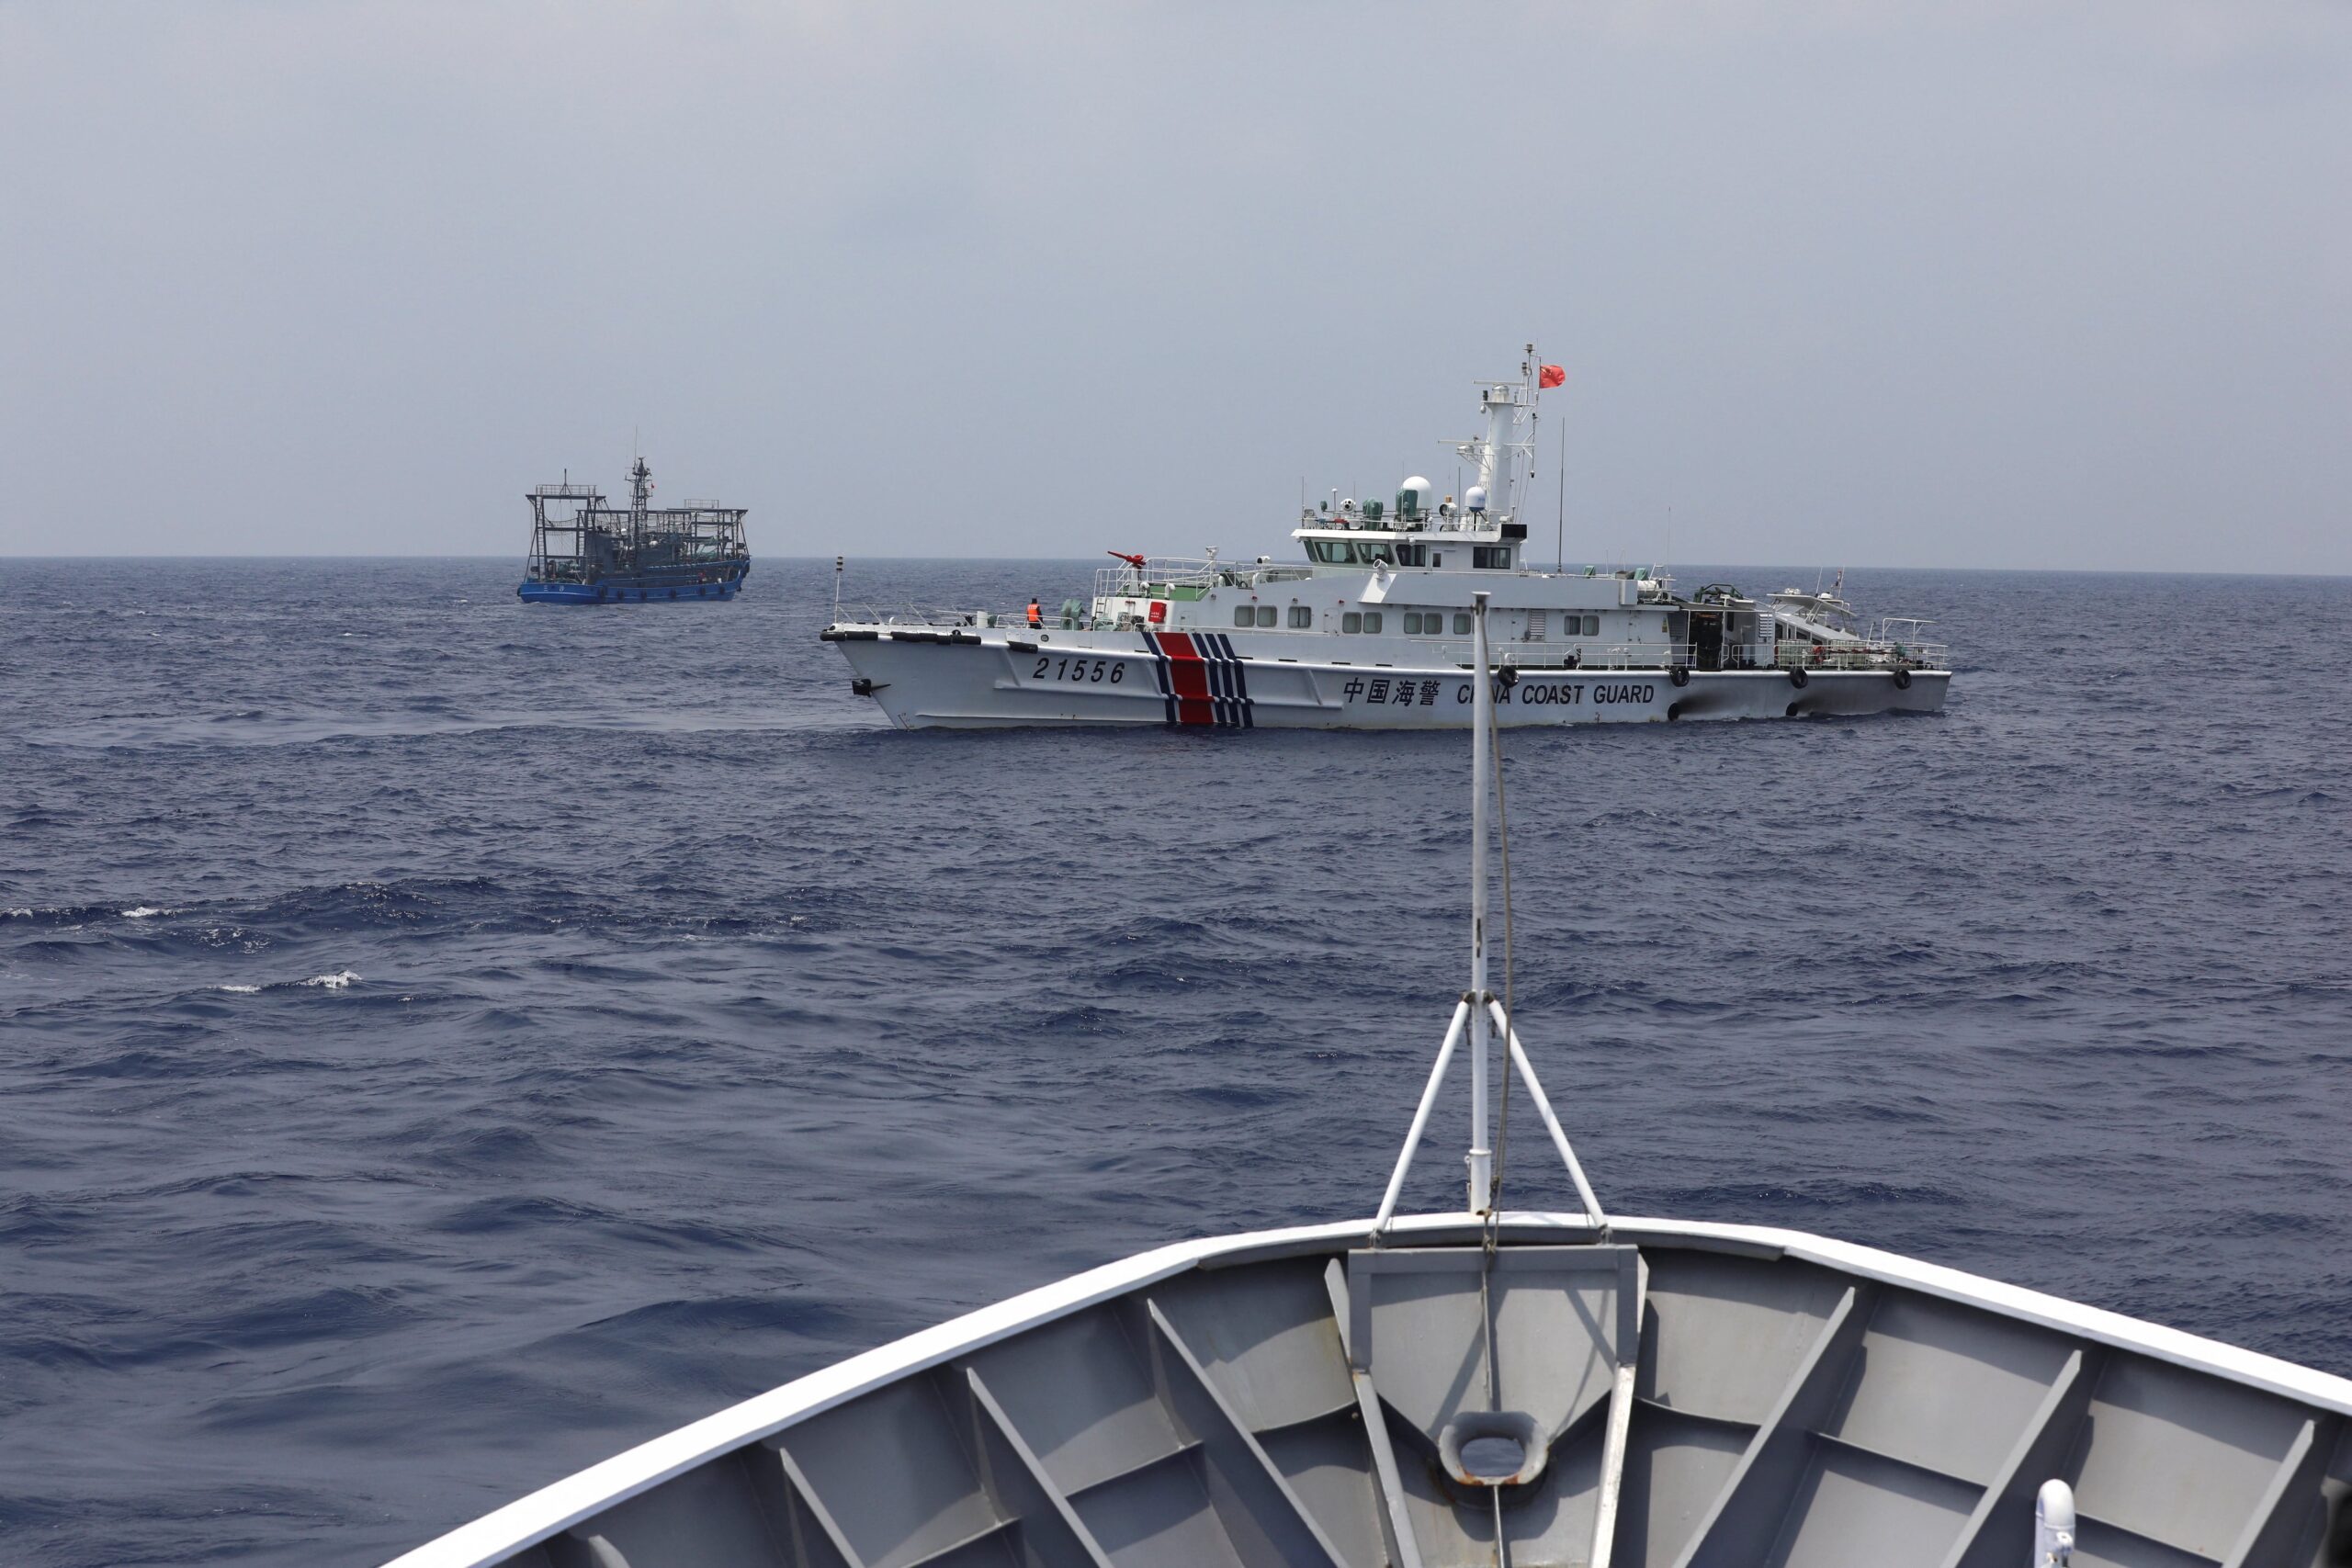 Unjustified, disturbing: Countries condemn China over Philippine boat collision